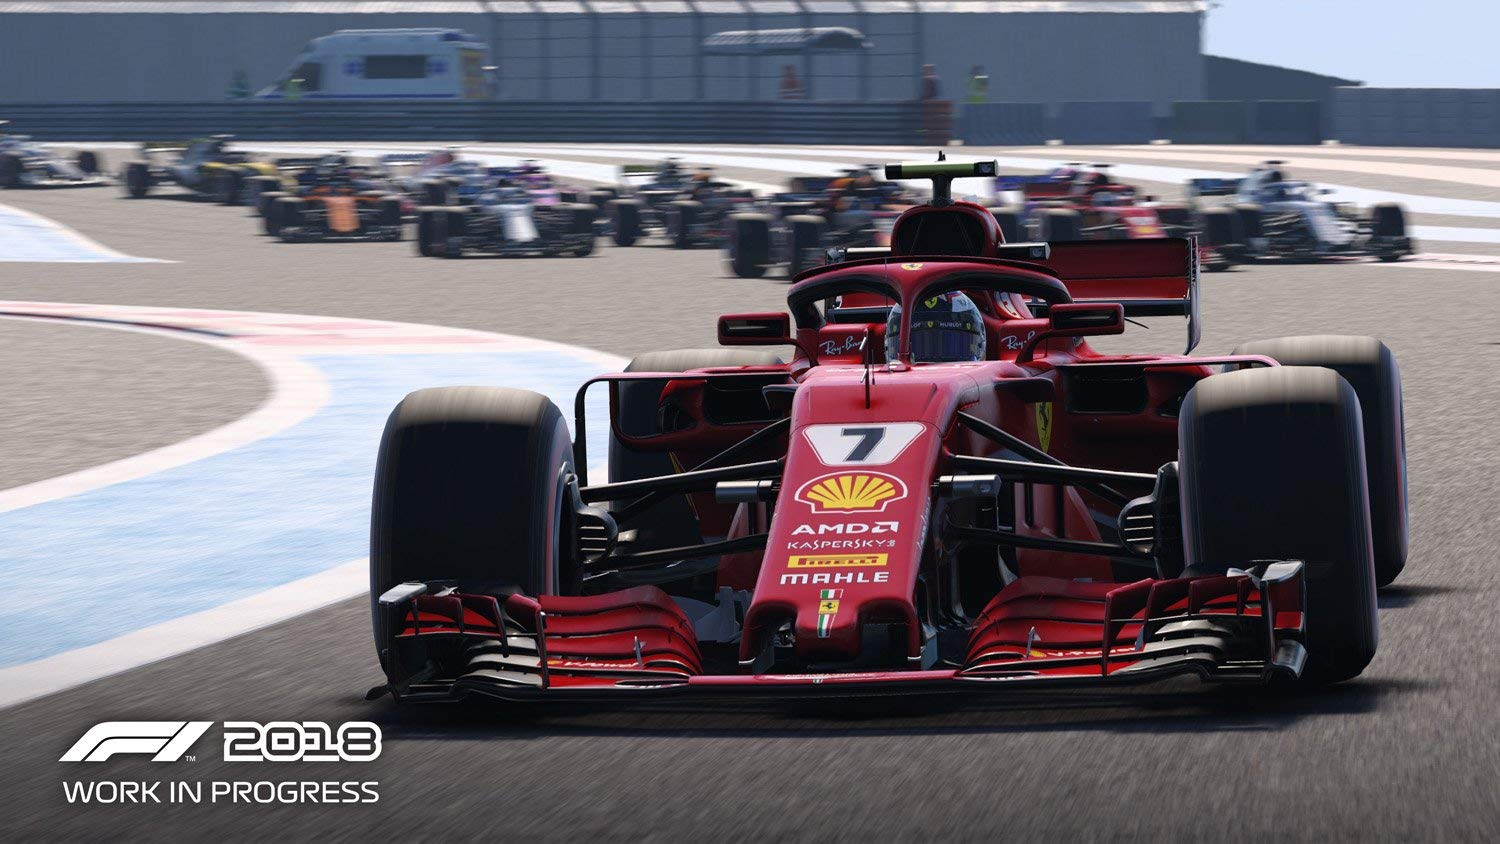 Codemasters Releases Final Gameplay Trailer For F1 2018